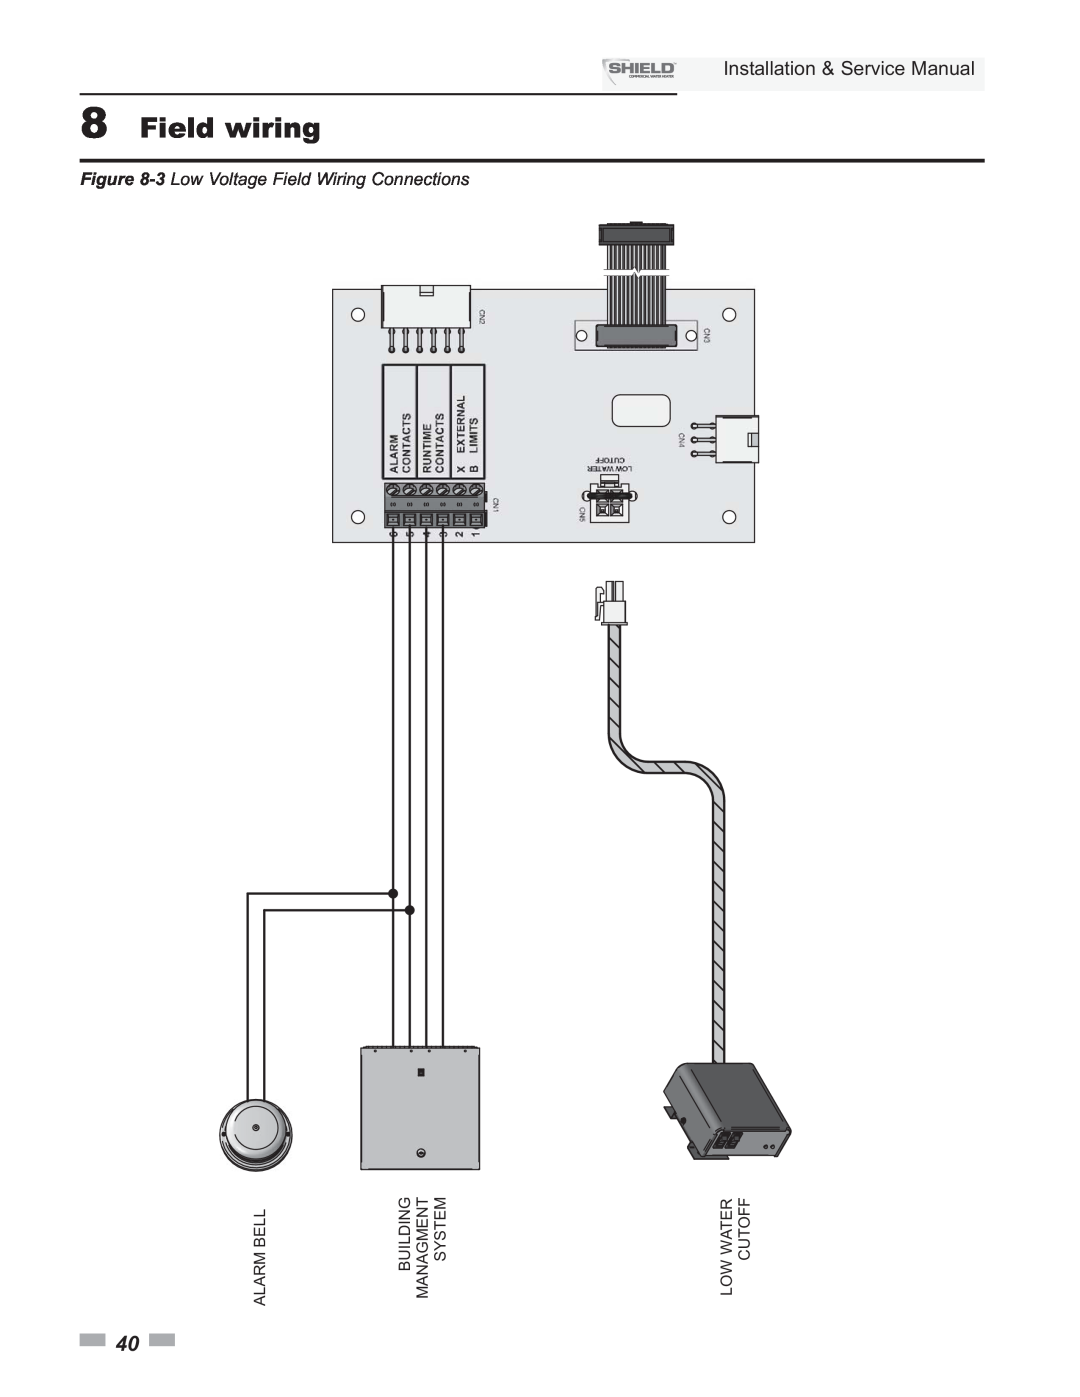 Lochinvar SNA500-125 8Field wiring, Installation & Service Manual, 3 Low Voltage Field Wiring Connections, Alarm Bell 